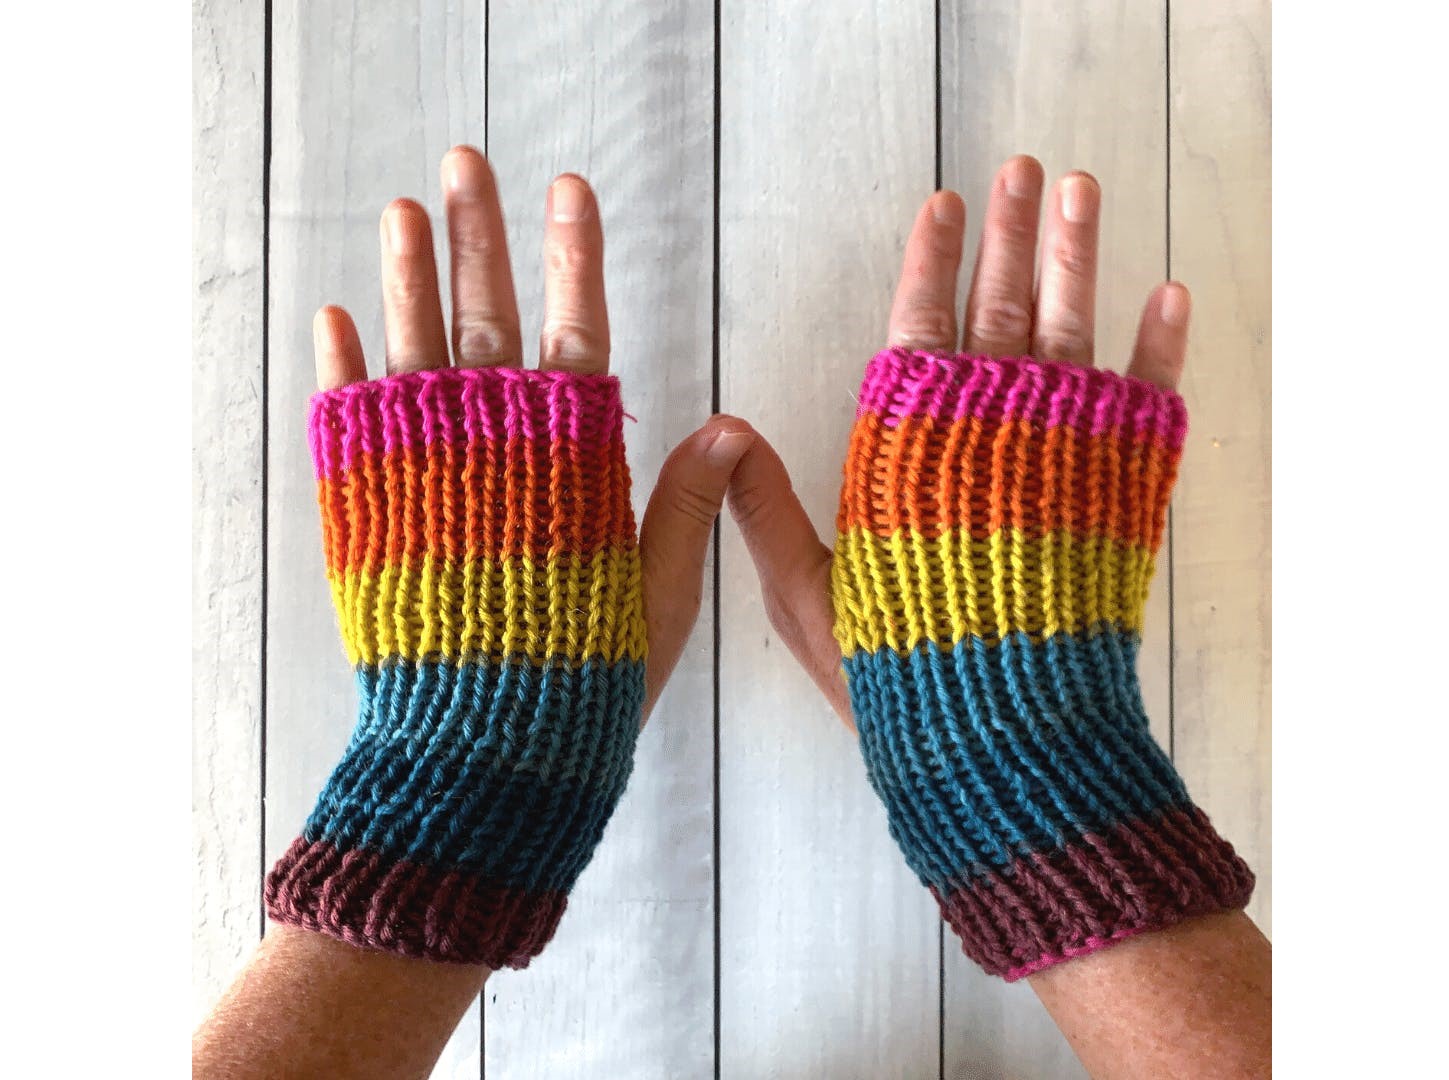 How to knit a pair of fingerless mitts - Crafts on display